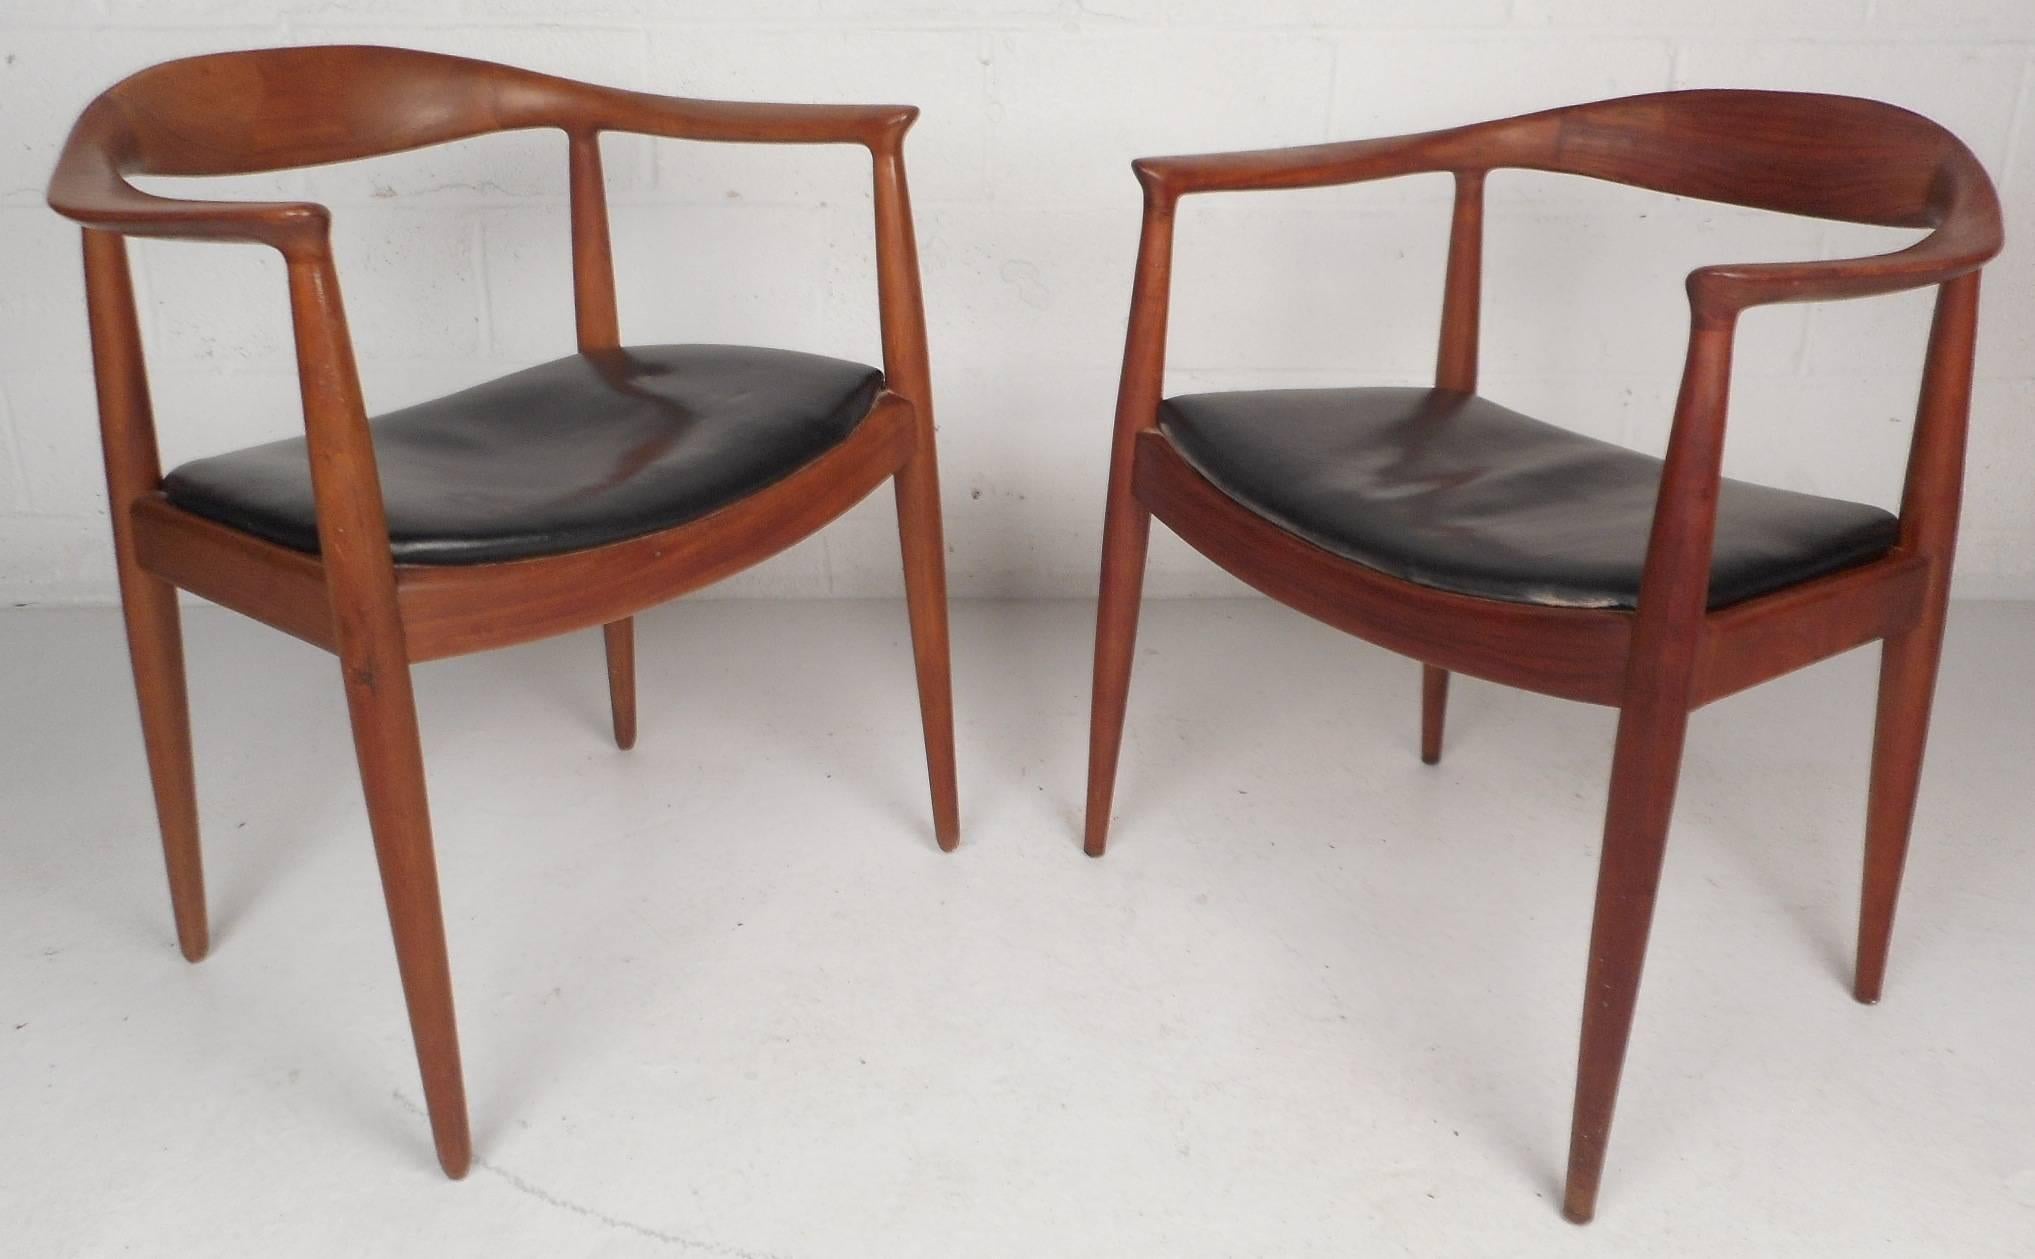 This stunning pair of vintage modern side chairs feature sculpted arm rests and a unique barrel backrest. Elegant wood grain compliments the black leather seats. Sleek design sits on top of four long angled and tapered legs which provide sturdiness